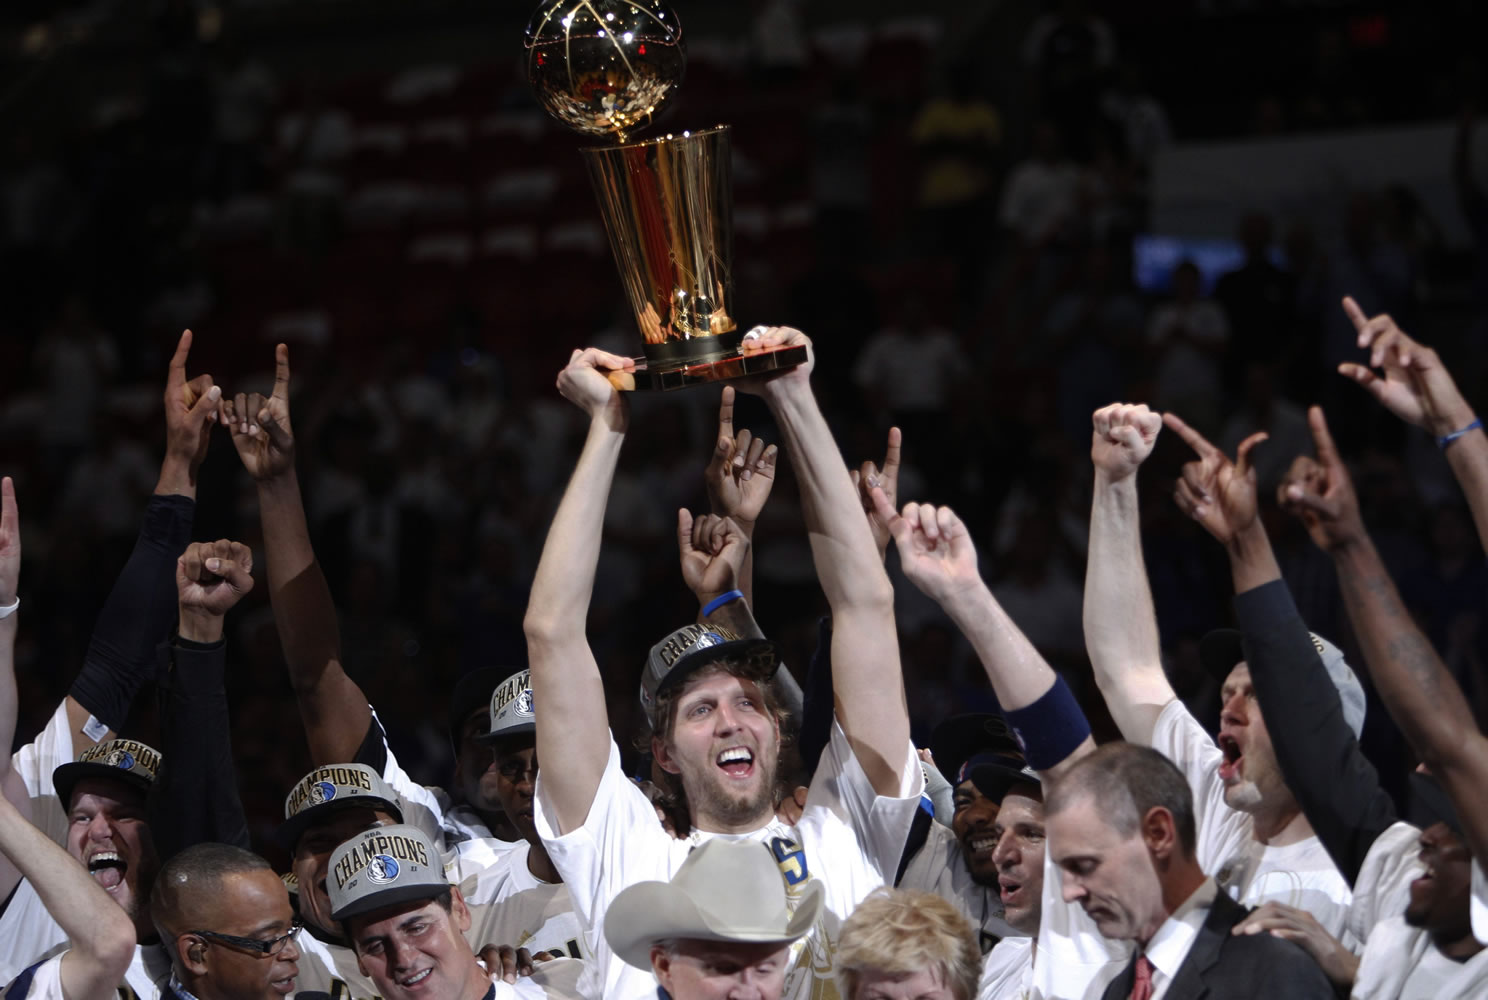 Dallas Mavericks' Dirk Nowitzki holds up the championship trophy after defeating the Miami Heat 105-95 in Game 6 of the NBA Finals on Sunday.